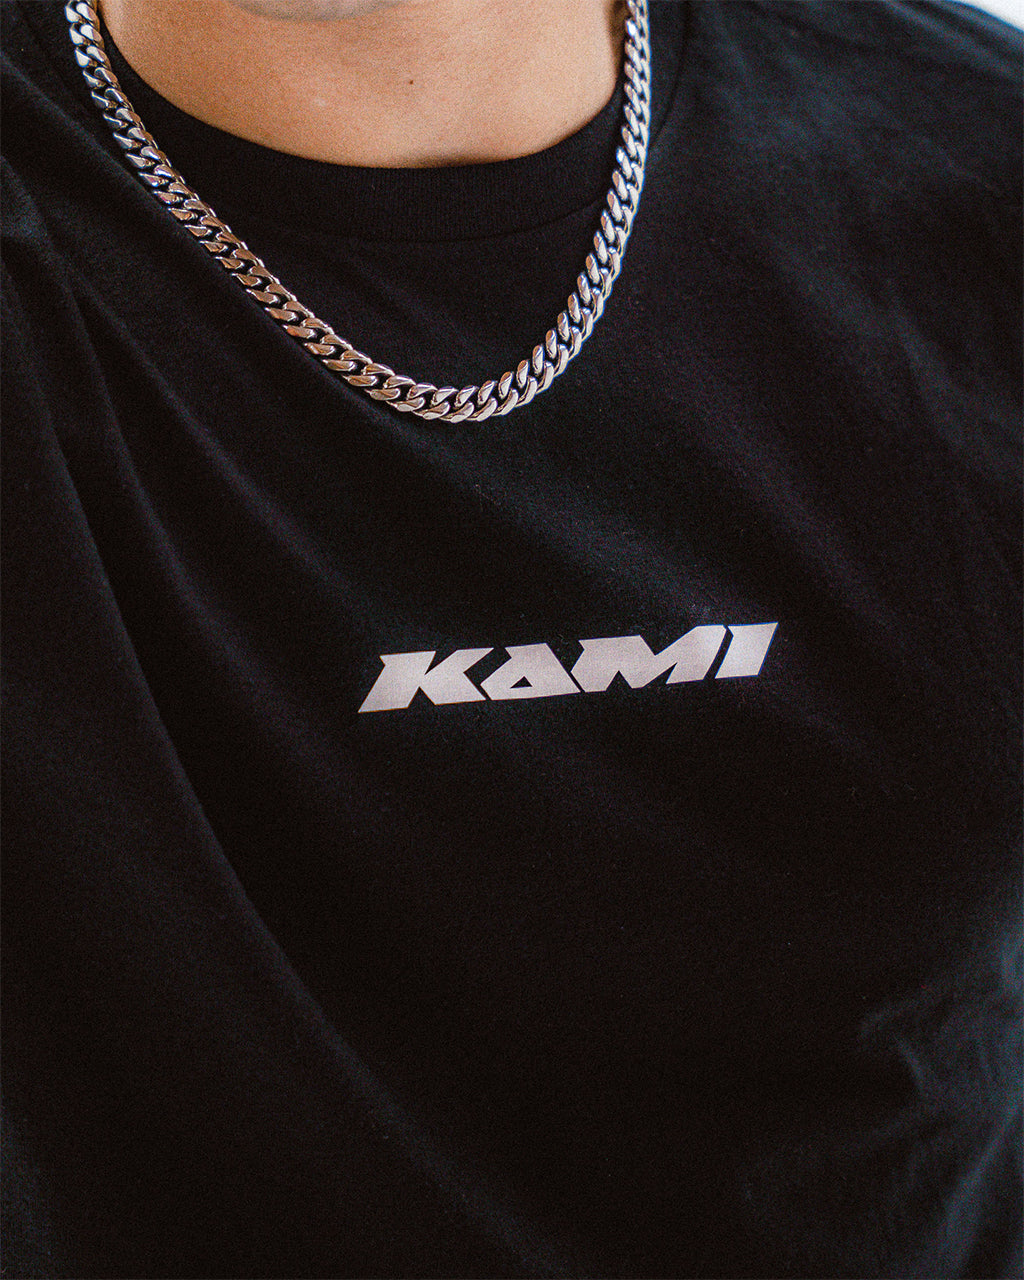 KAMI Fitted (Scan for Hard Dance) T-Shirt